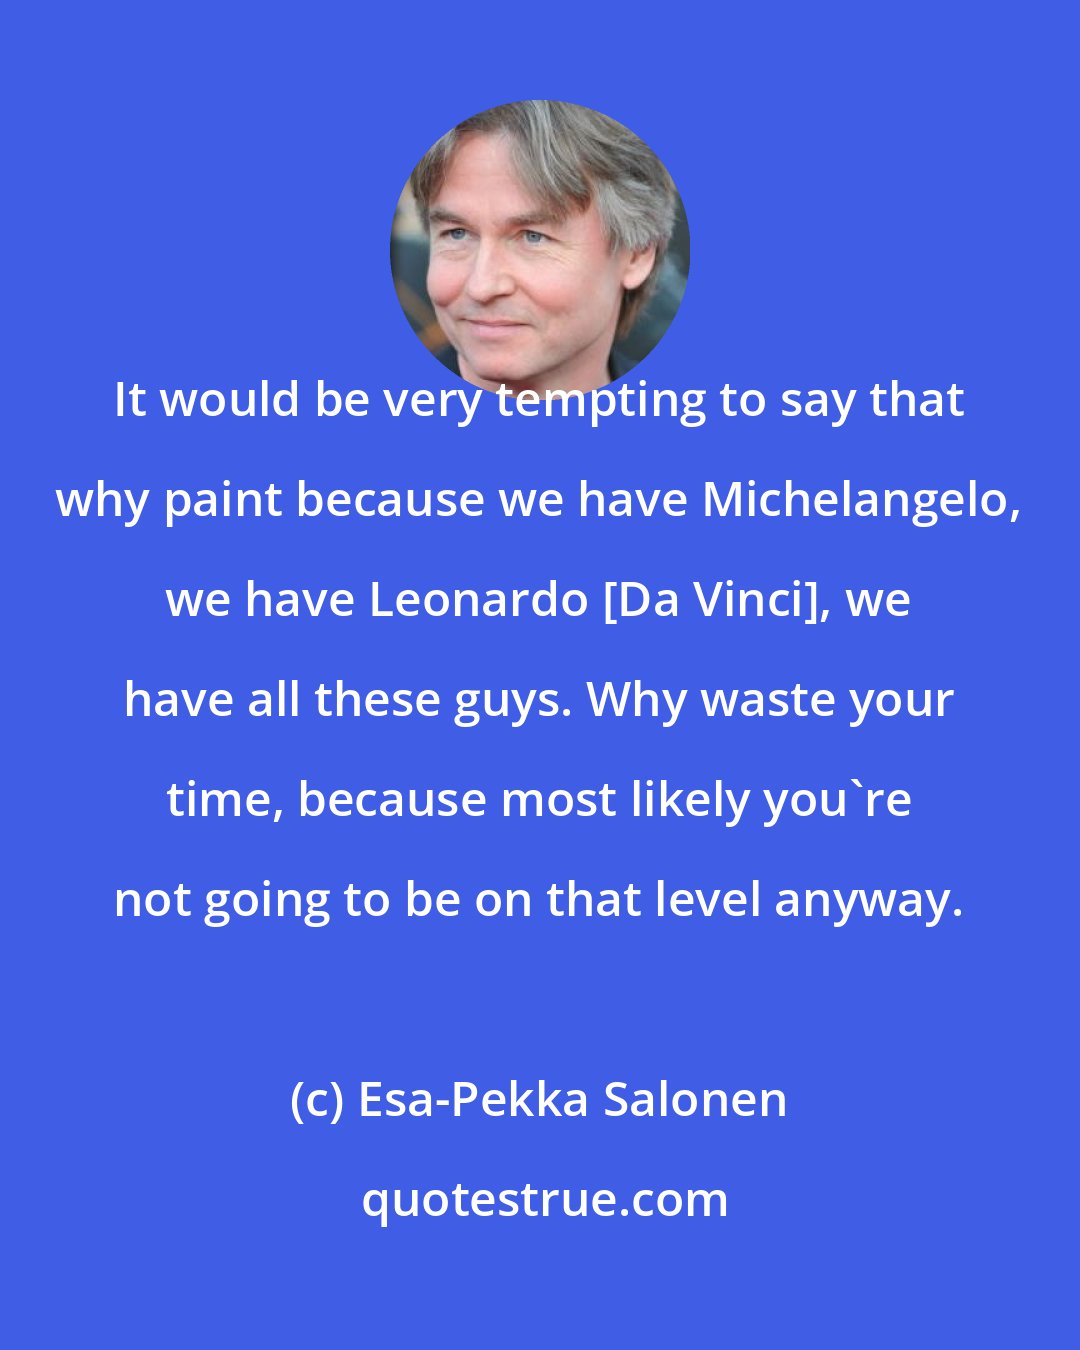 Esa-Pekka Salonen: It would be very tempting to say that why paint because we have Michelangelo, we have Leonardo [Da Vinci], we have all these guys. Why waste your time, because most likely you're not going to be on that level anyway.